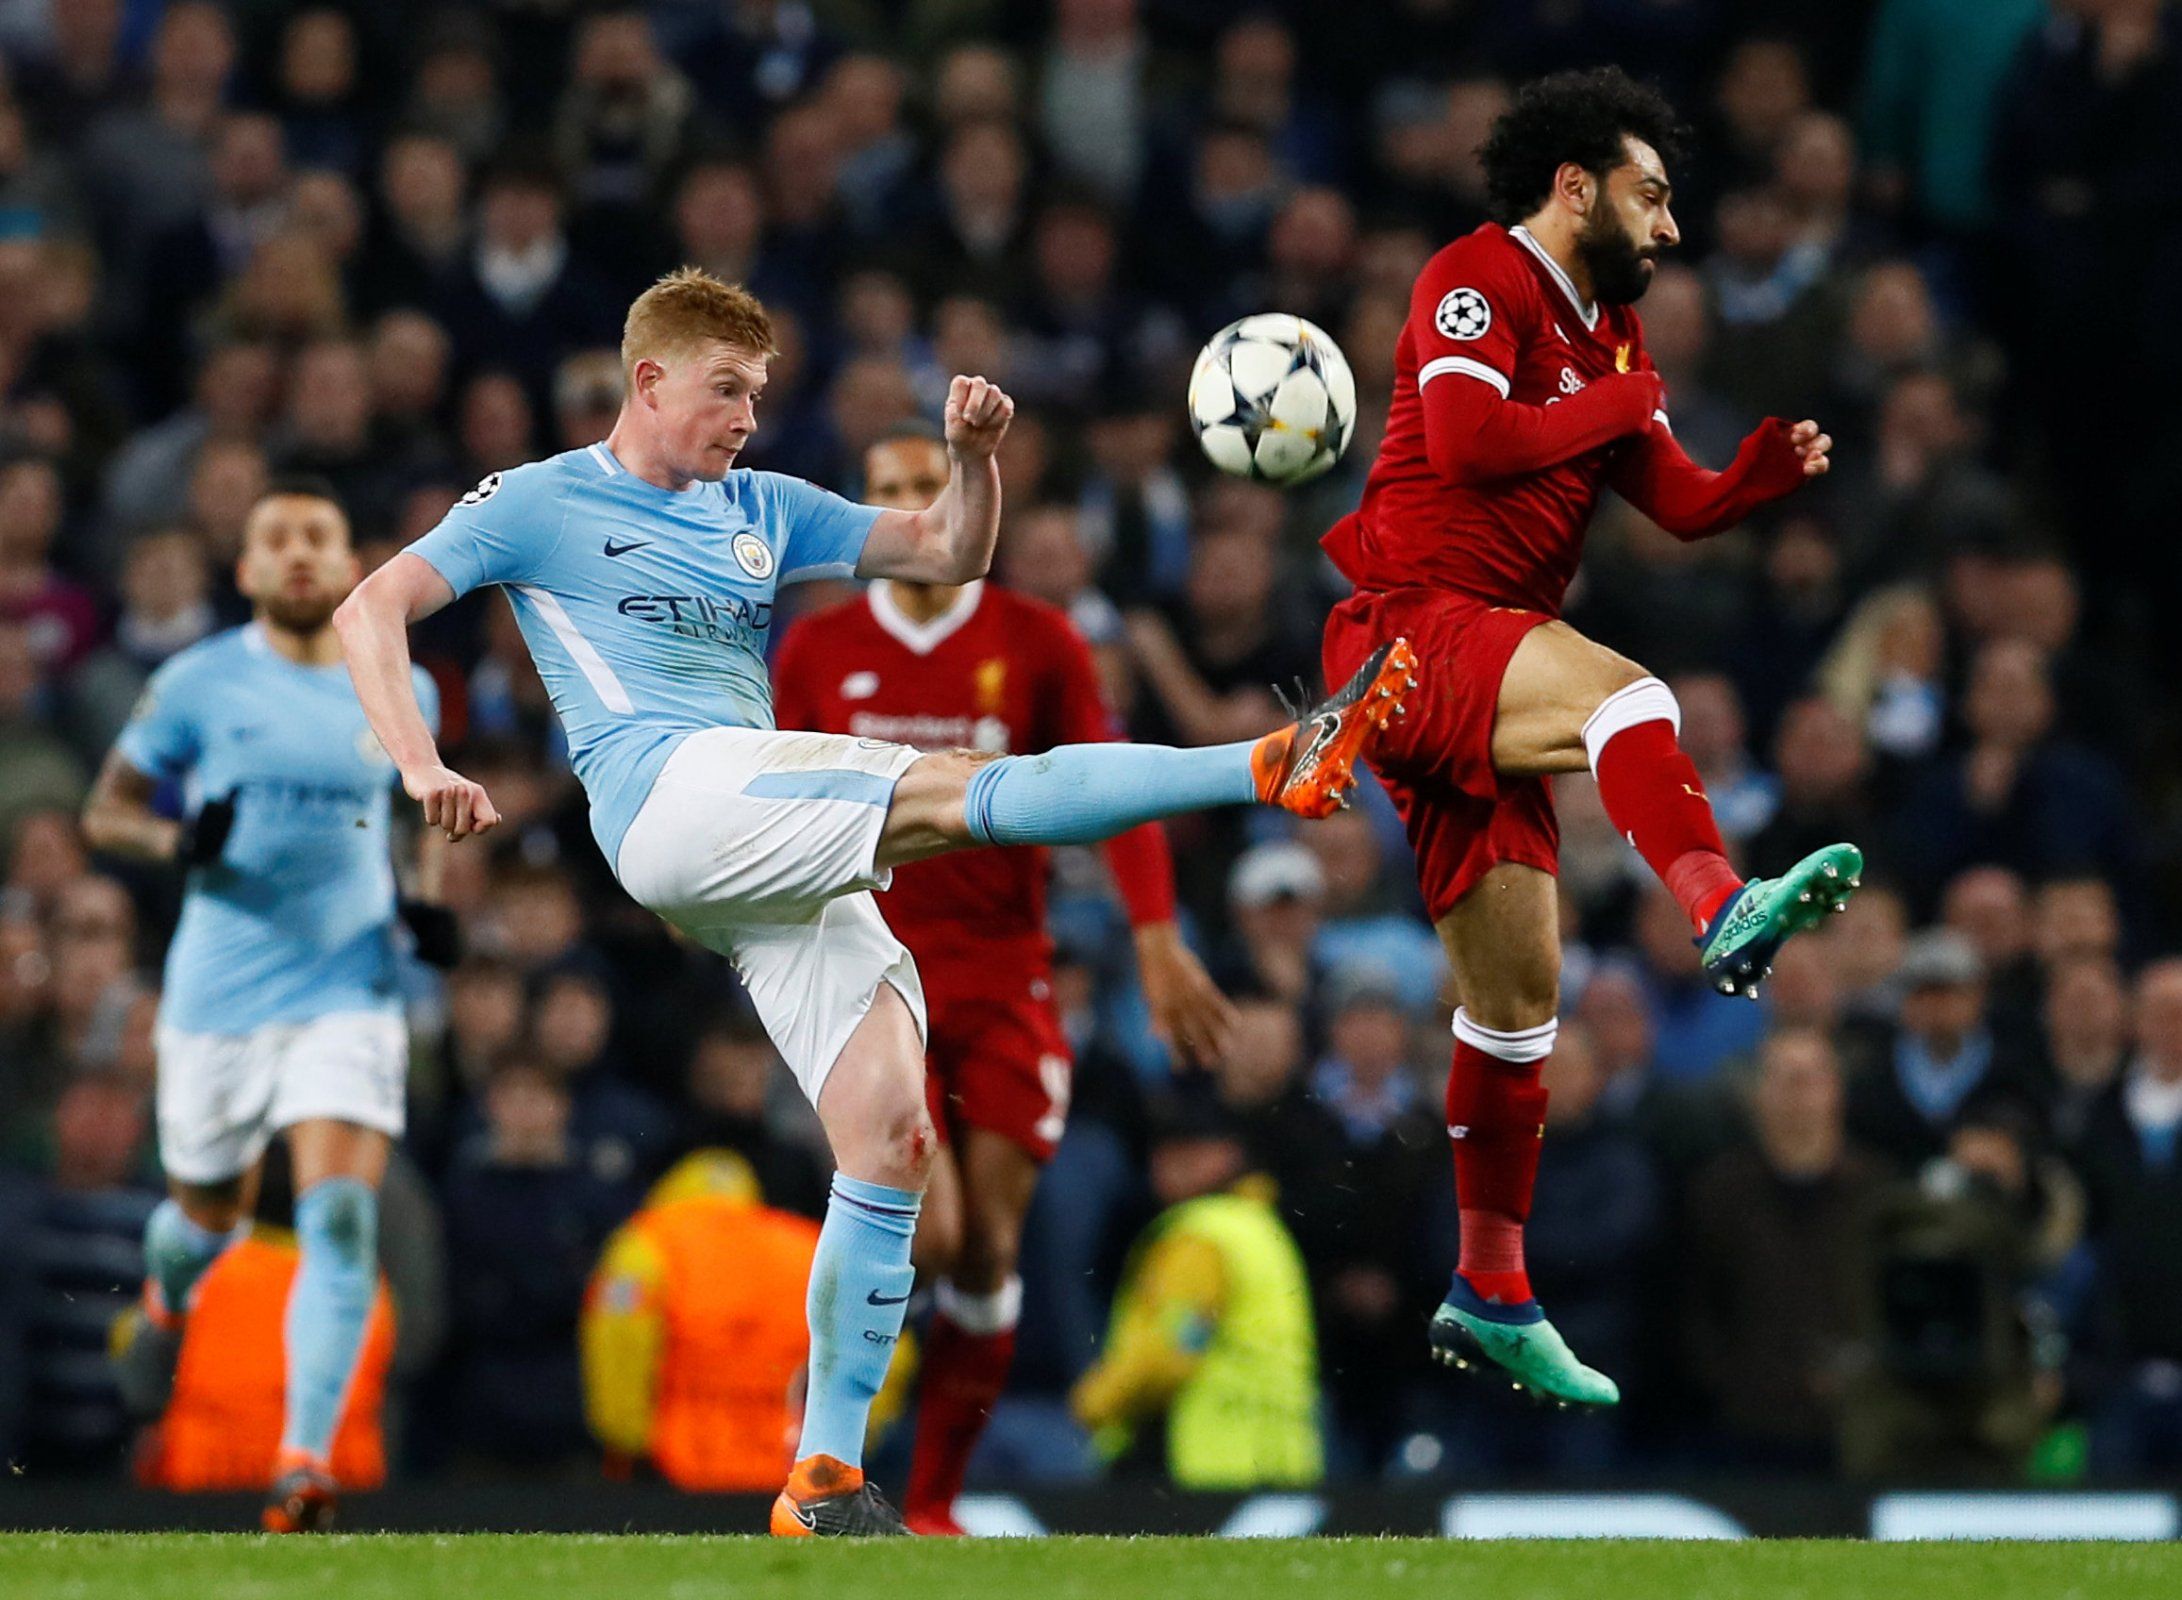 Kevin De Bruyne and Mohamed Salah fight for the ball in the Champions League quarter-final between Manchester City and Liverpool